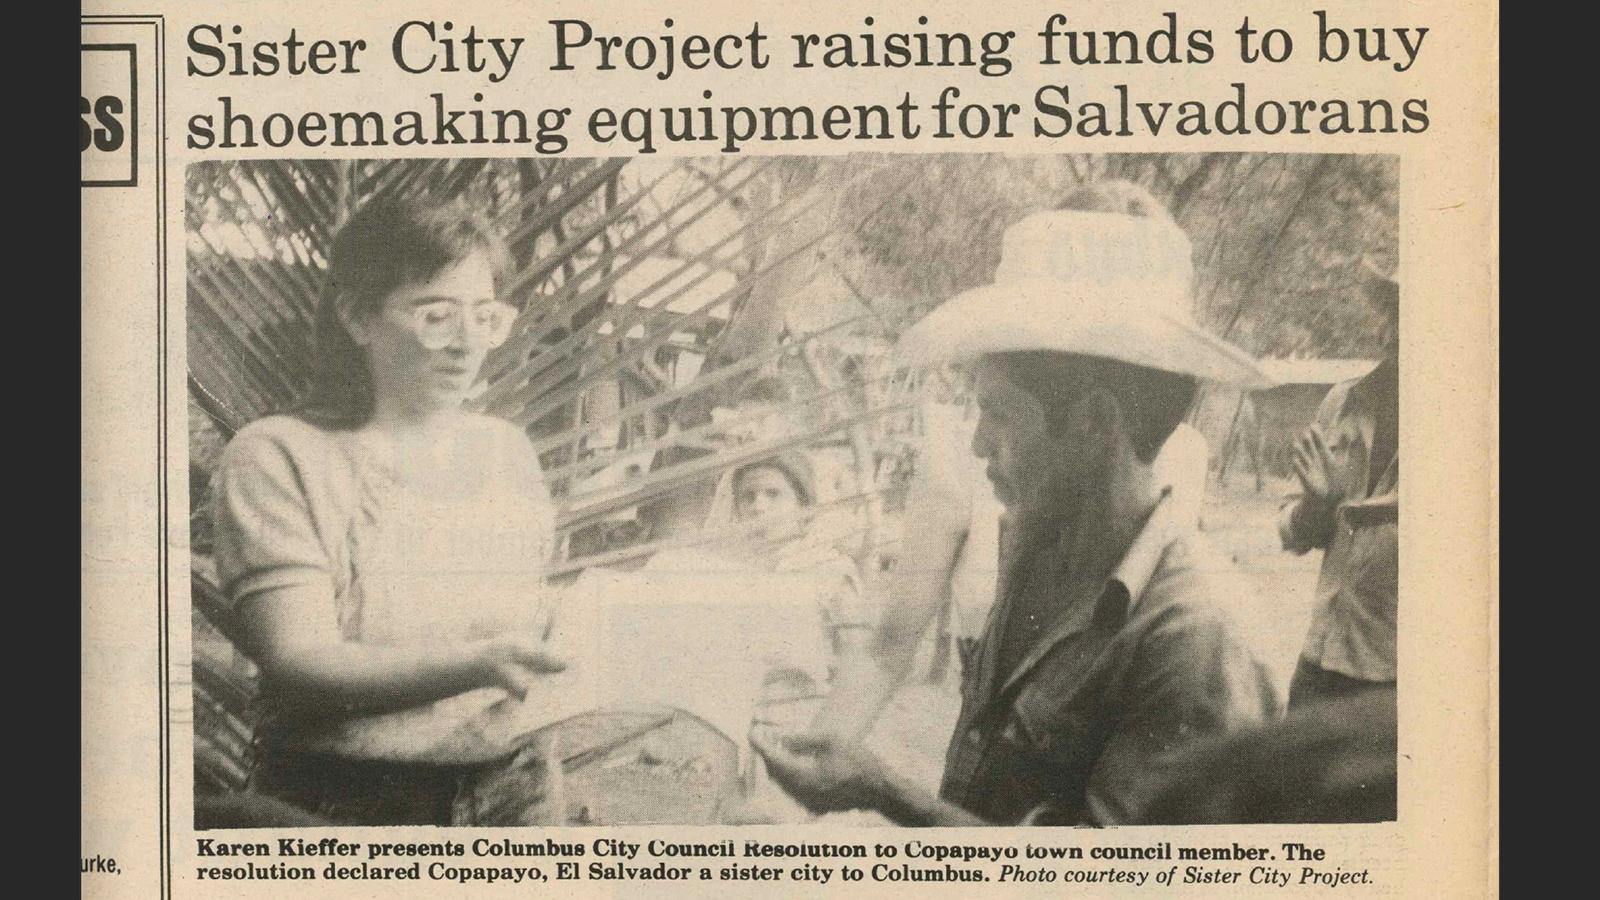 Newspaper article about Sister City Project fundraising